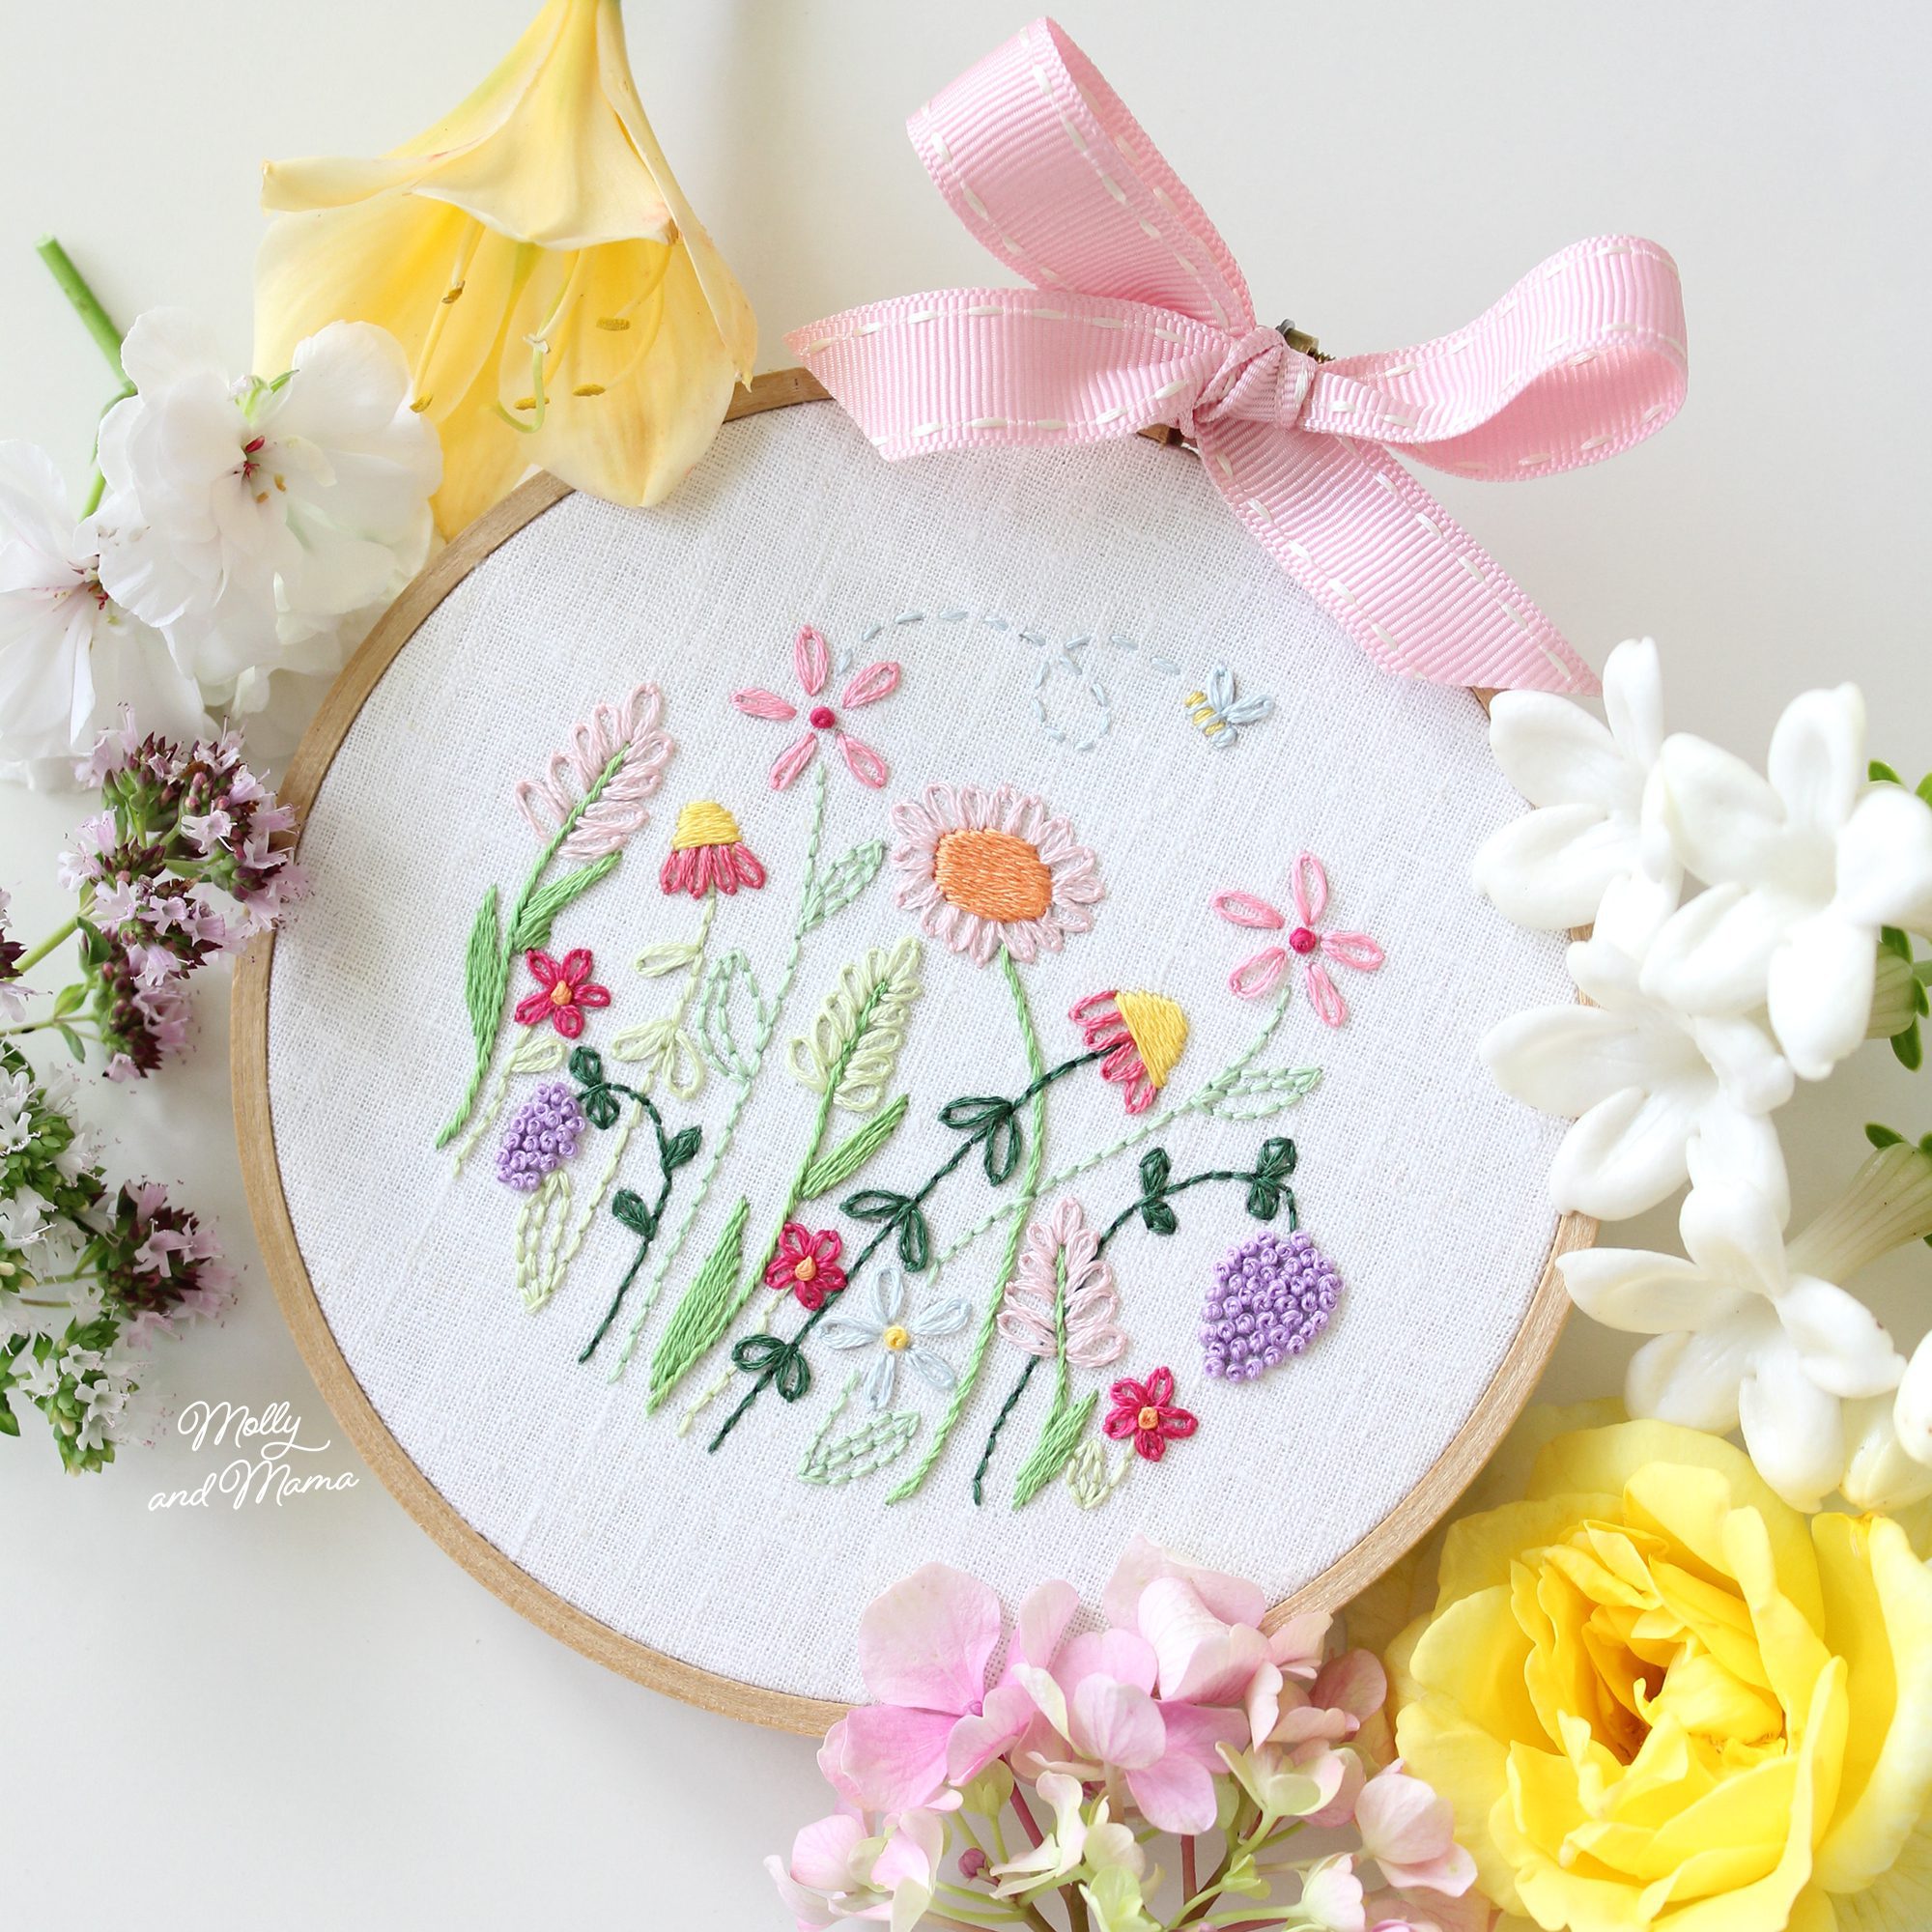 Welcome To Nan’s Garden – A beautiful floral embroidery design